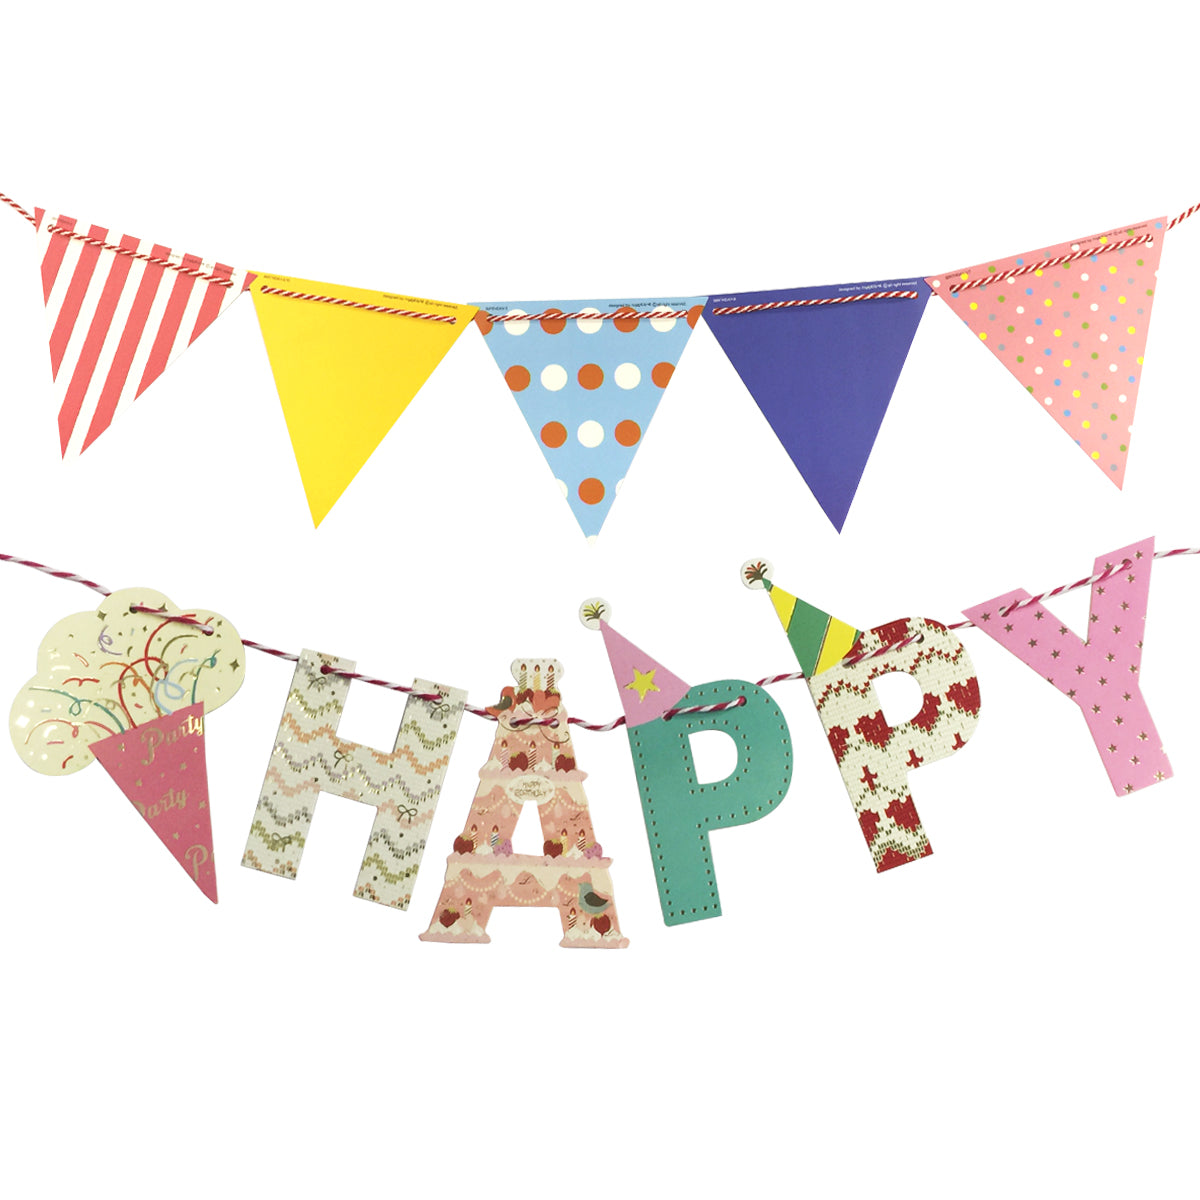 Wrapables Multi-Print Triangle Pennant and Birthday Banners Party Decorations